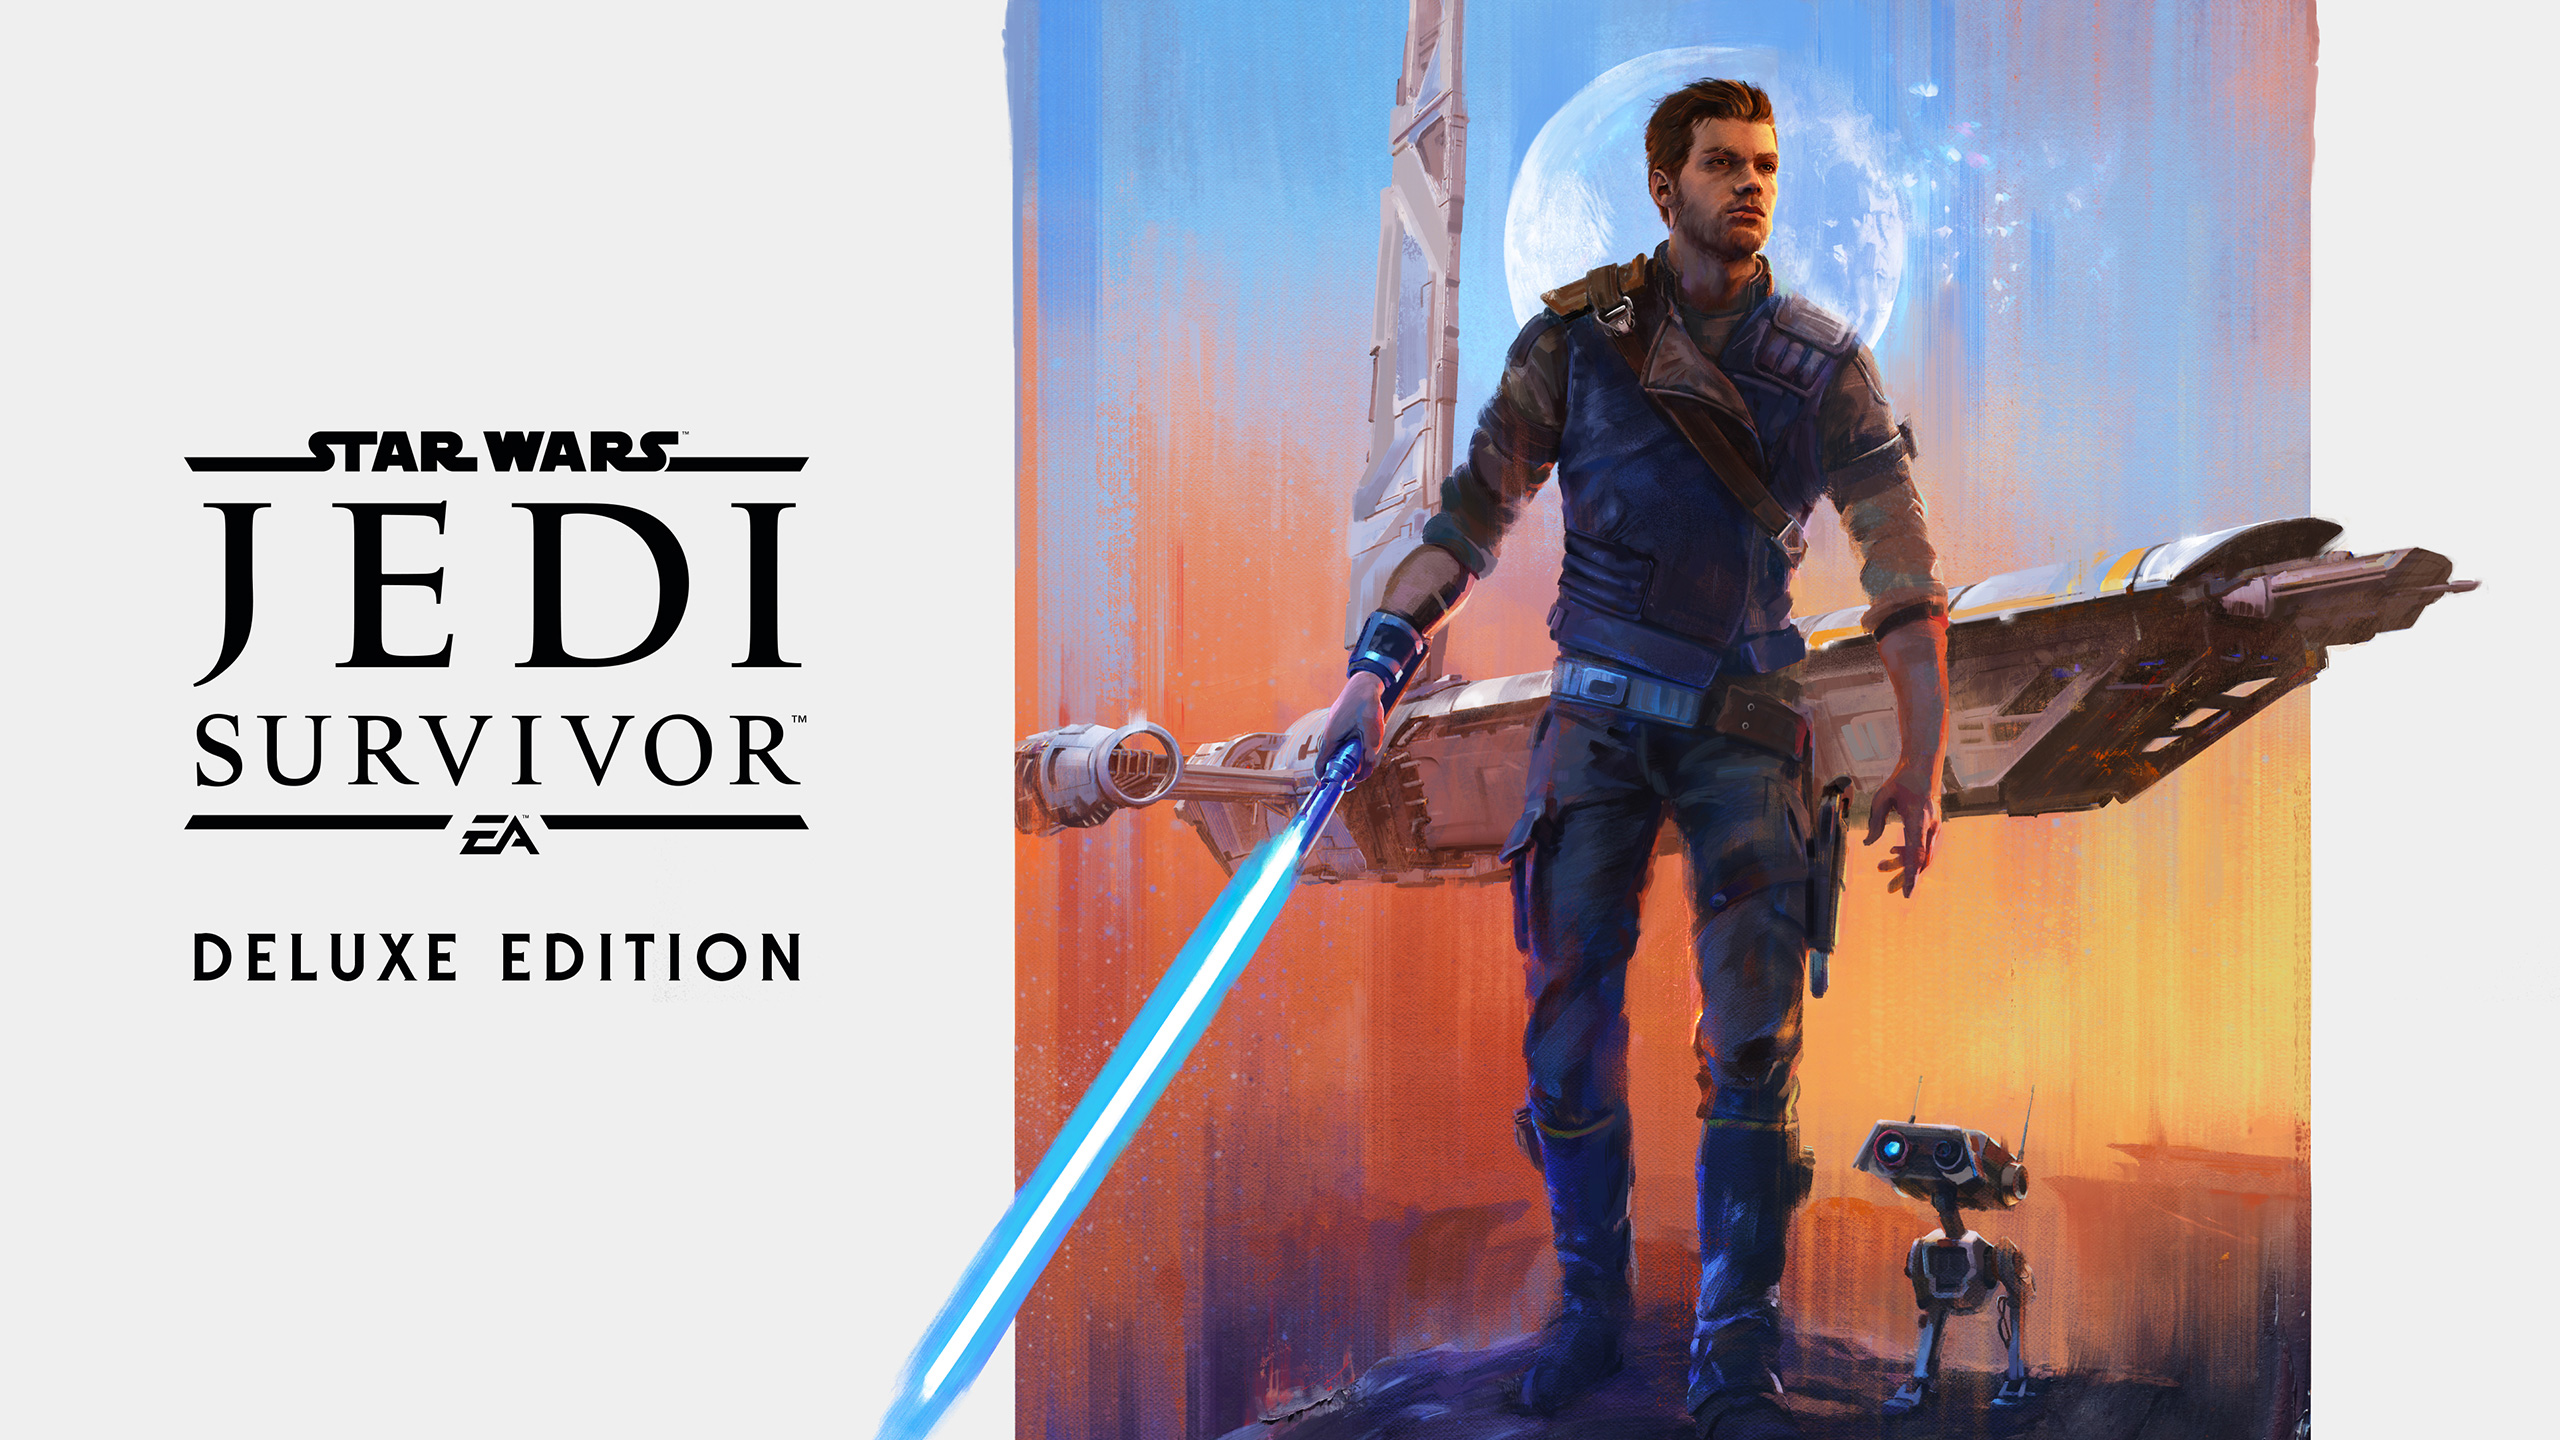 STAR WARS Jedi: Survivor™ Deluxe Edition. Download and Buy Today Games Store